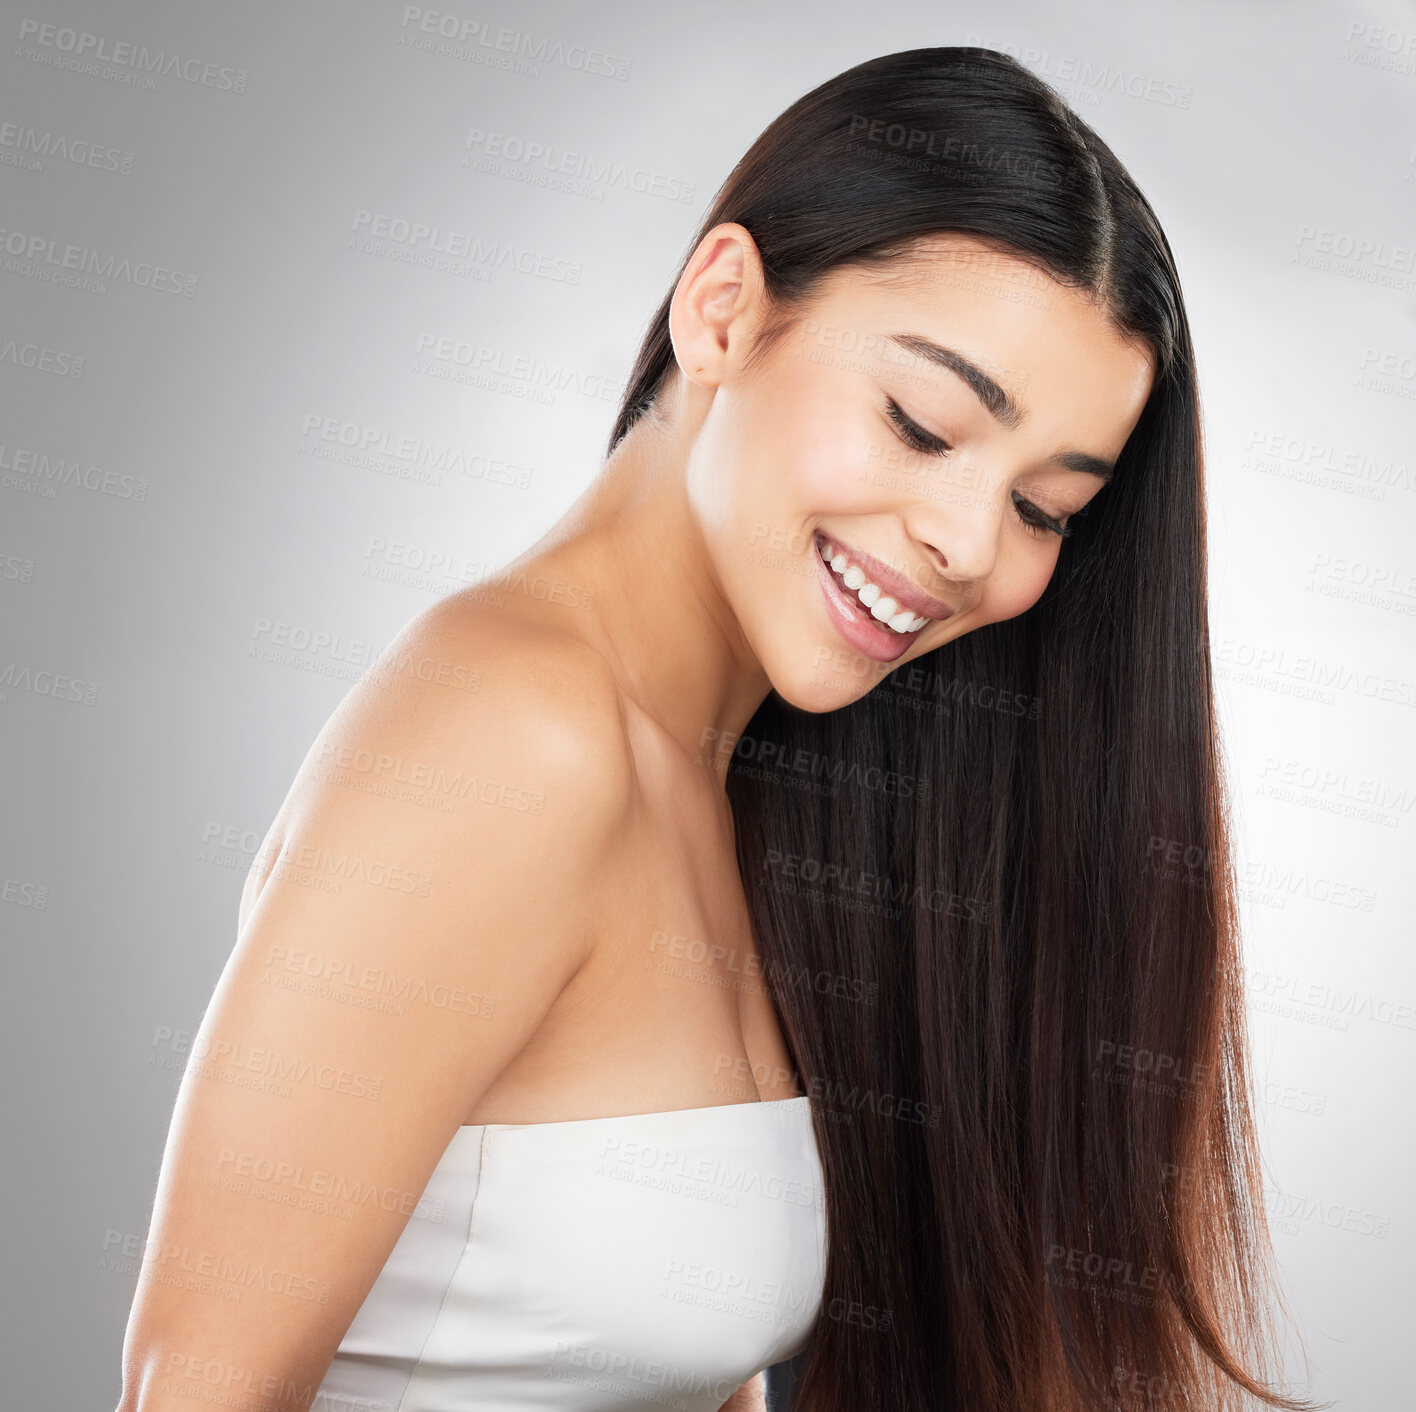 Buy stock photo Studio shot of a beautiful young woman showing off her long silky hair against a grey background